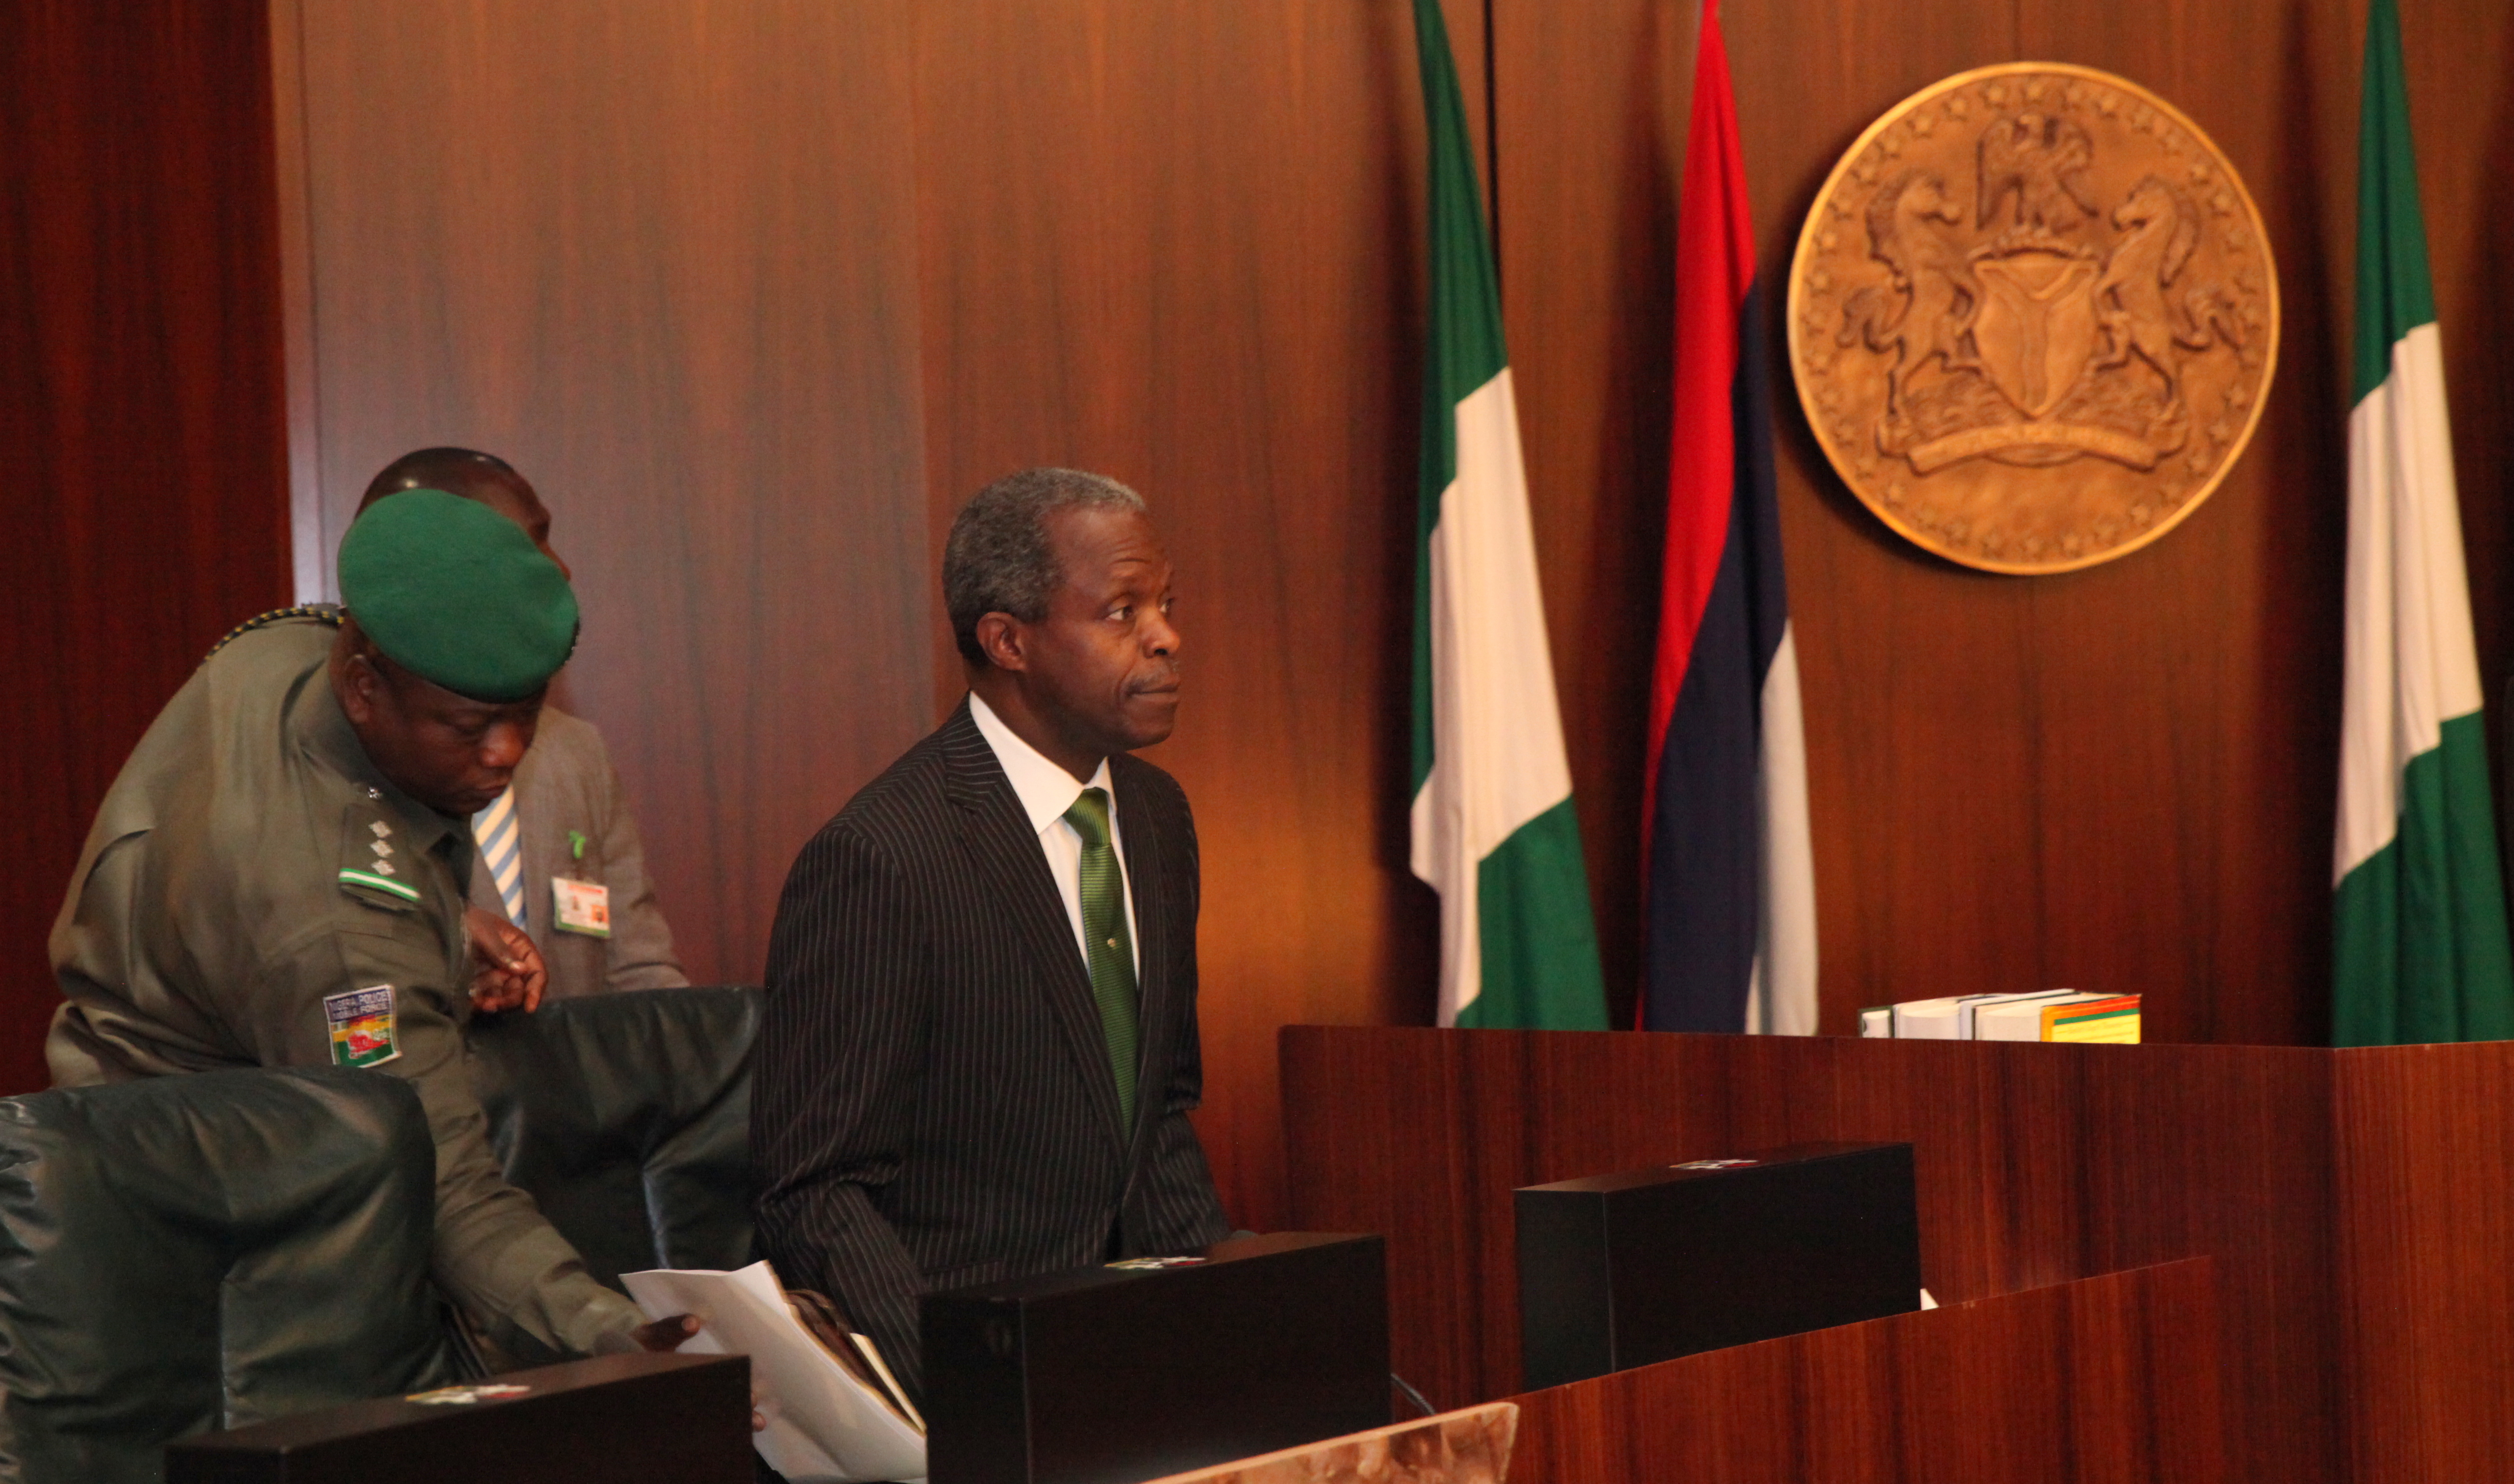 VP Osinbajo Presides Over The National Economic Council (NEC) Meeting On 17/09/2015